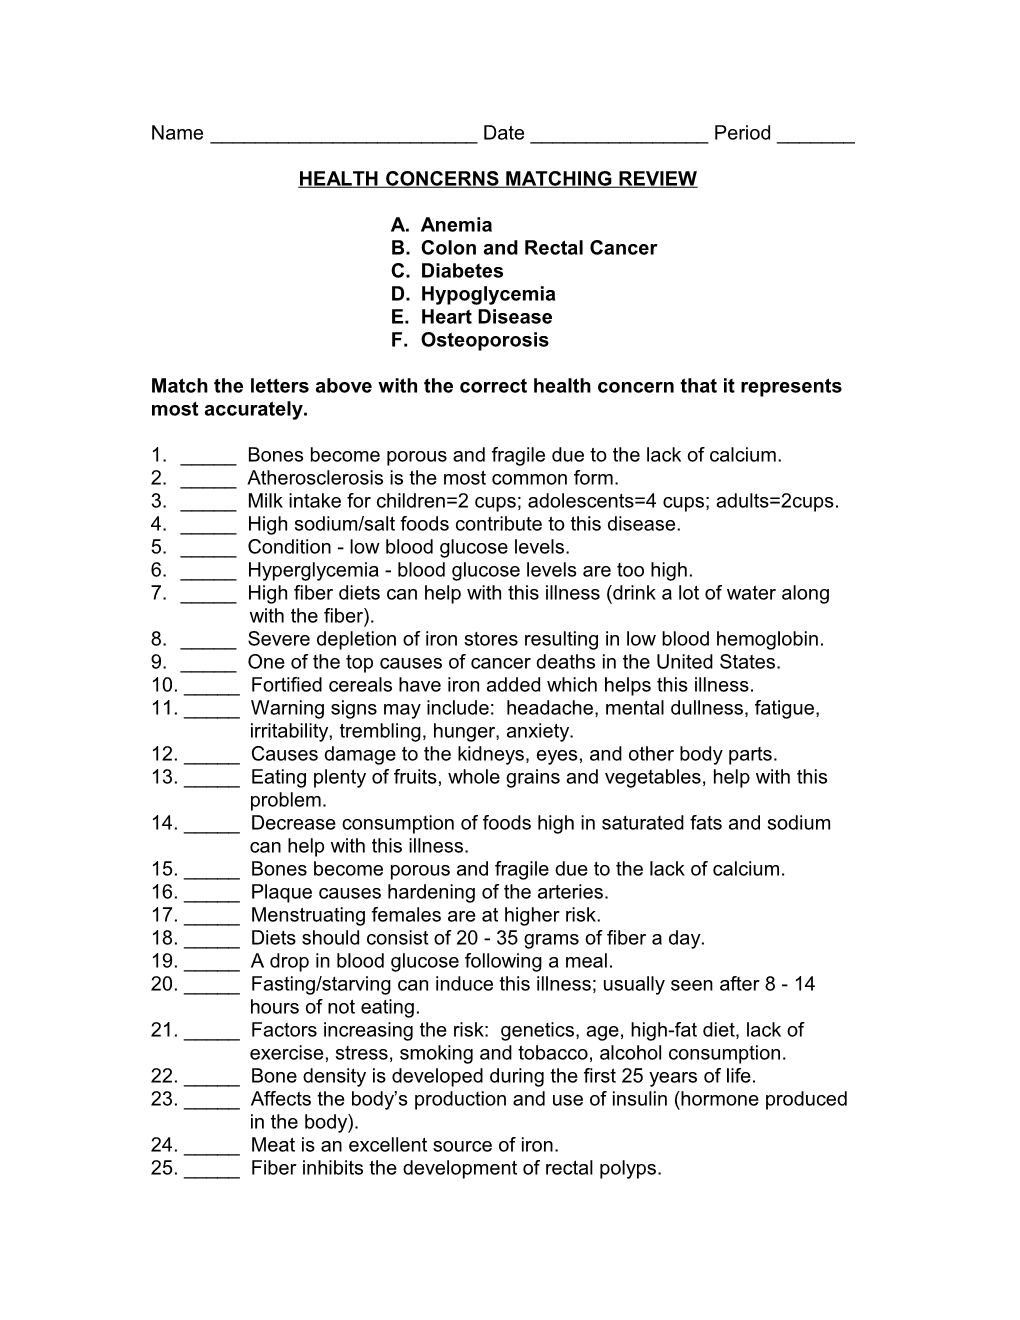 Health Concerns Matching Review